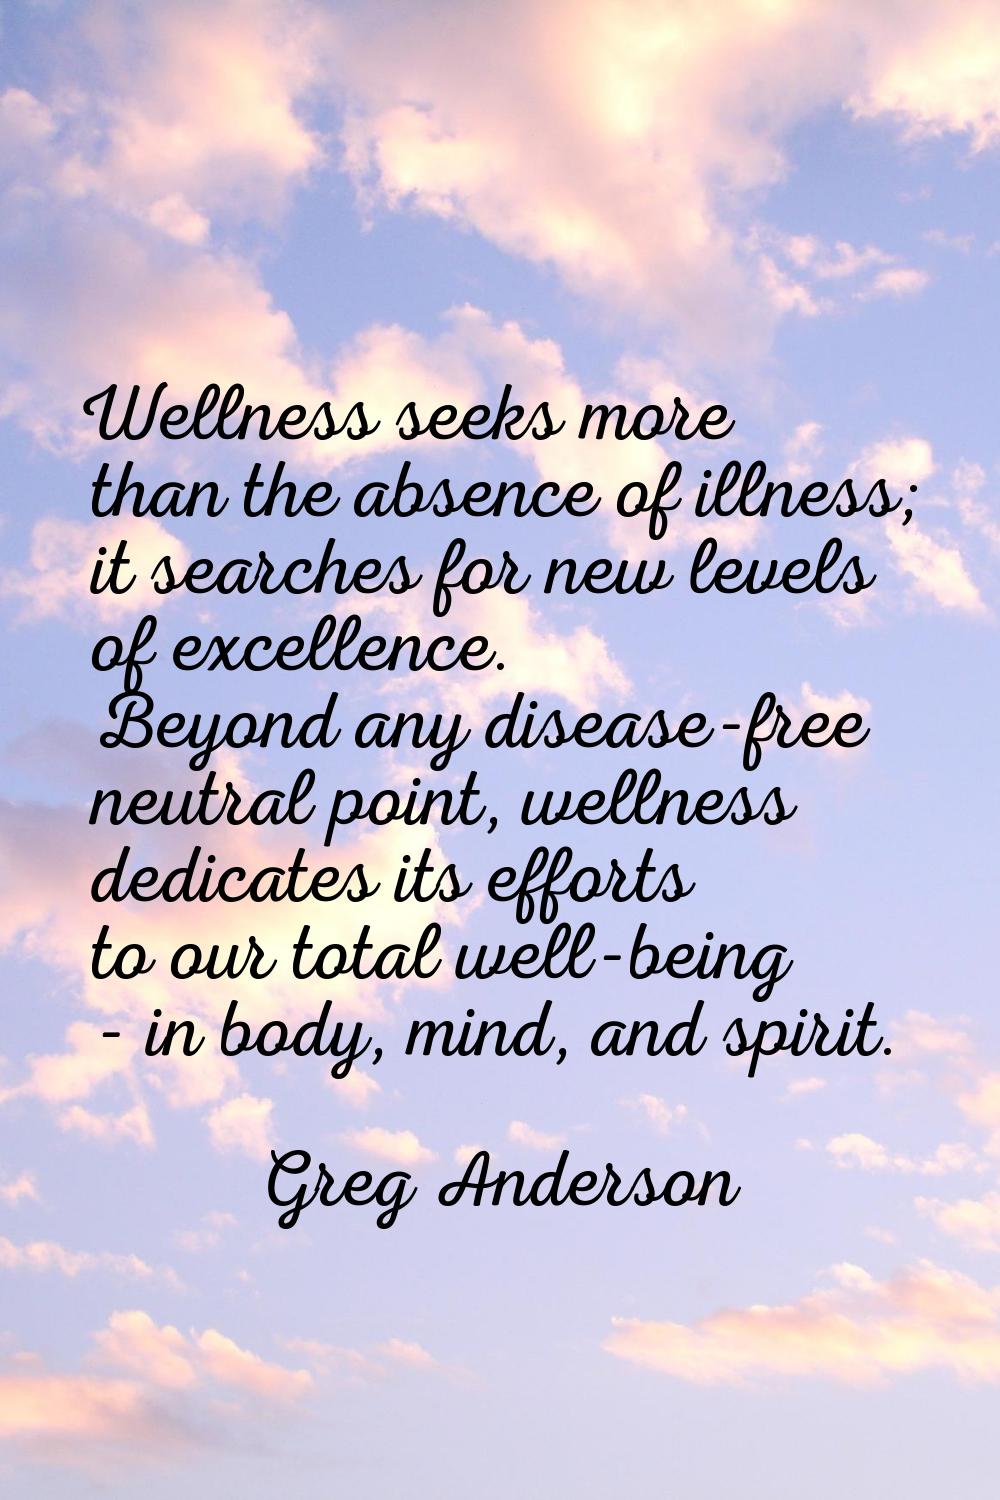 Wellness seeks more than the absence of illness; it searches for new levels of excellence. Beyond a